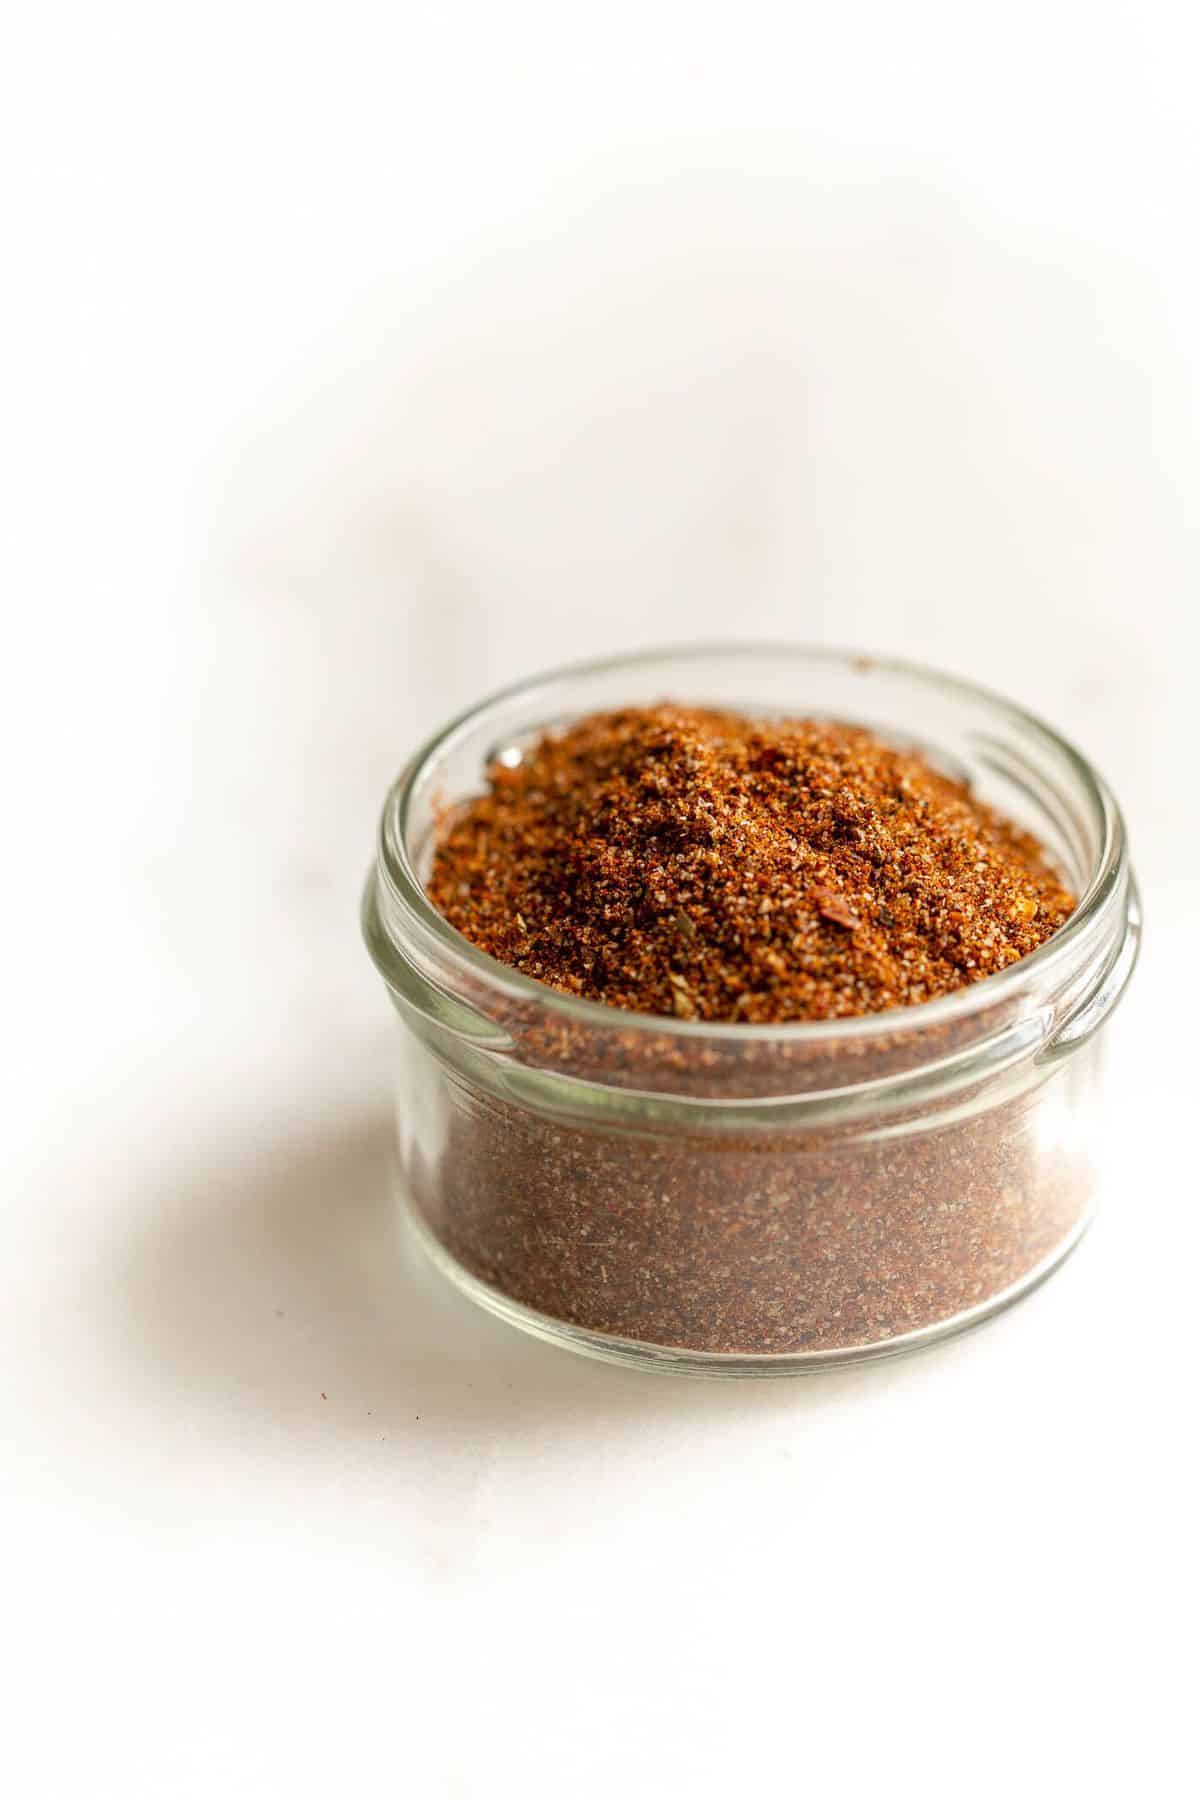 Homemade taco seasoning in a glass jar on a white surface.